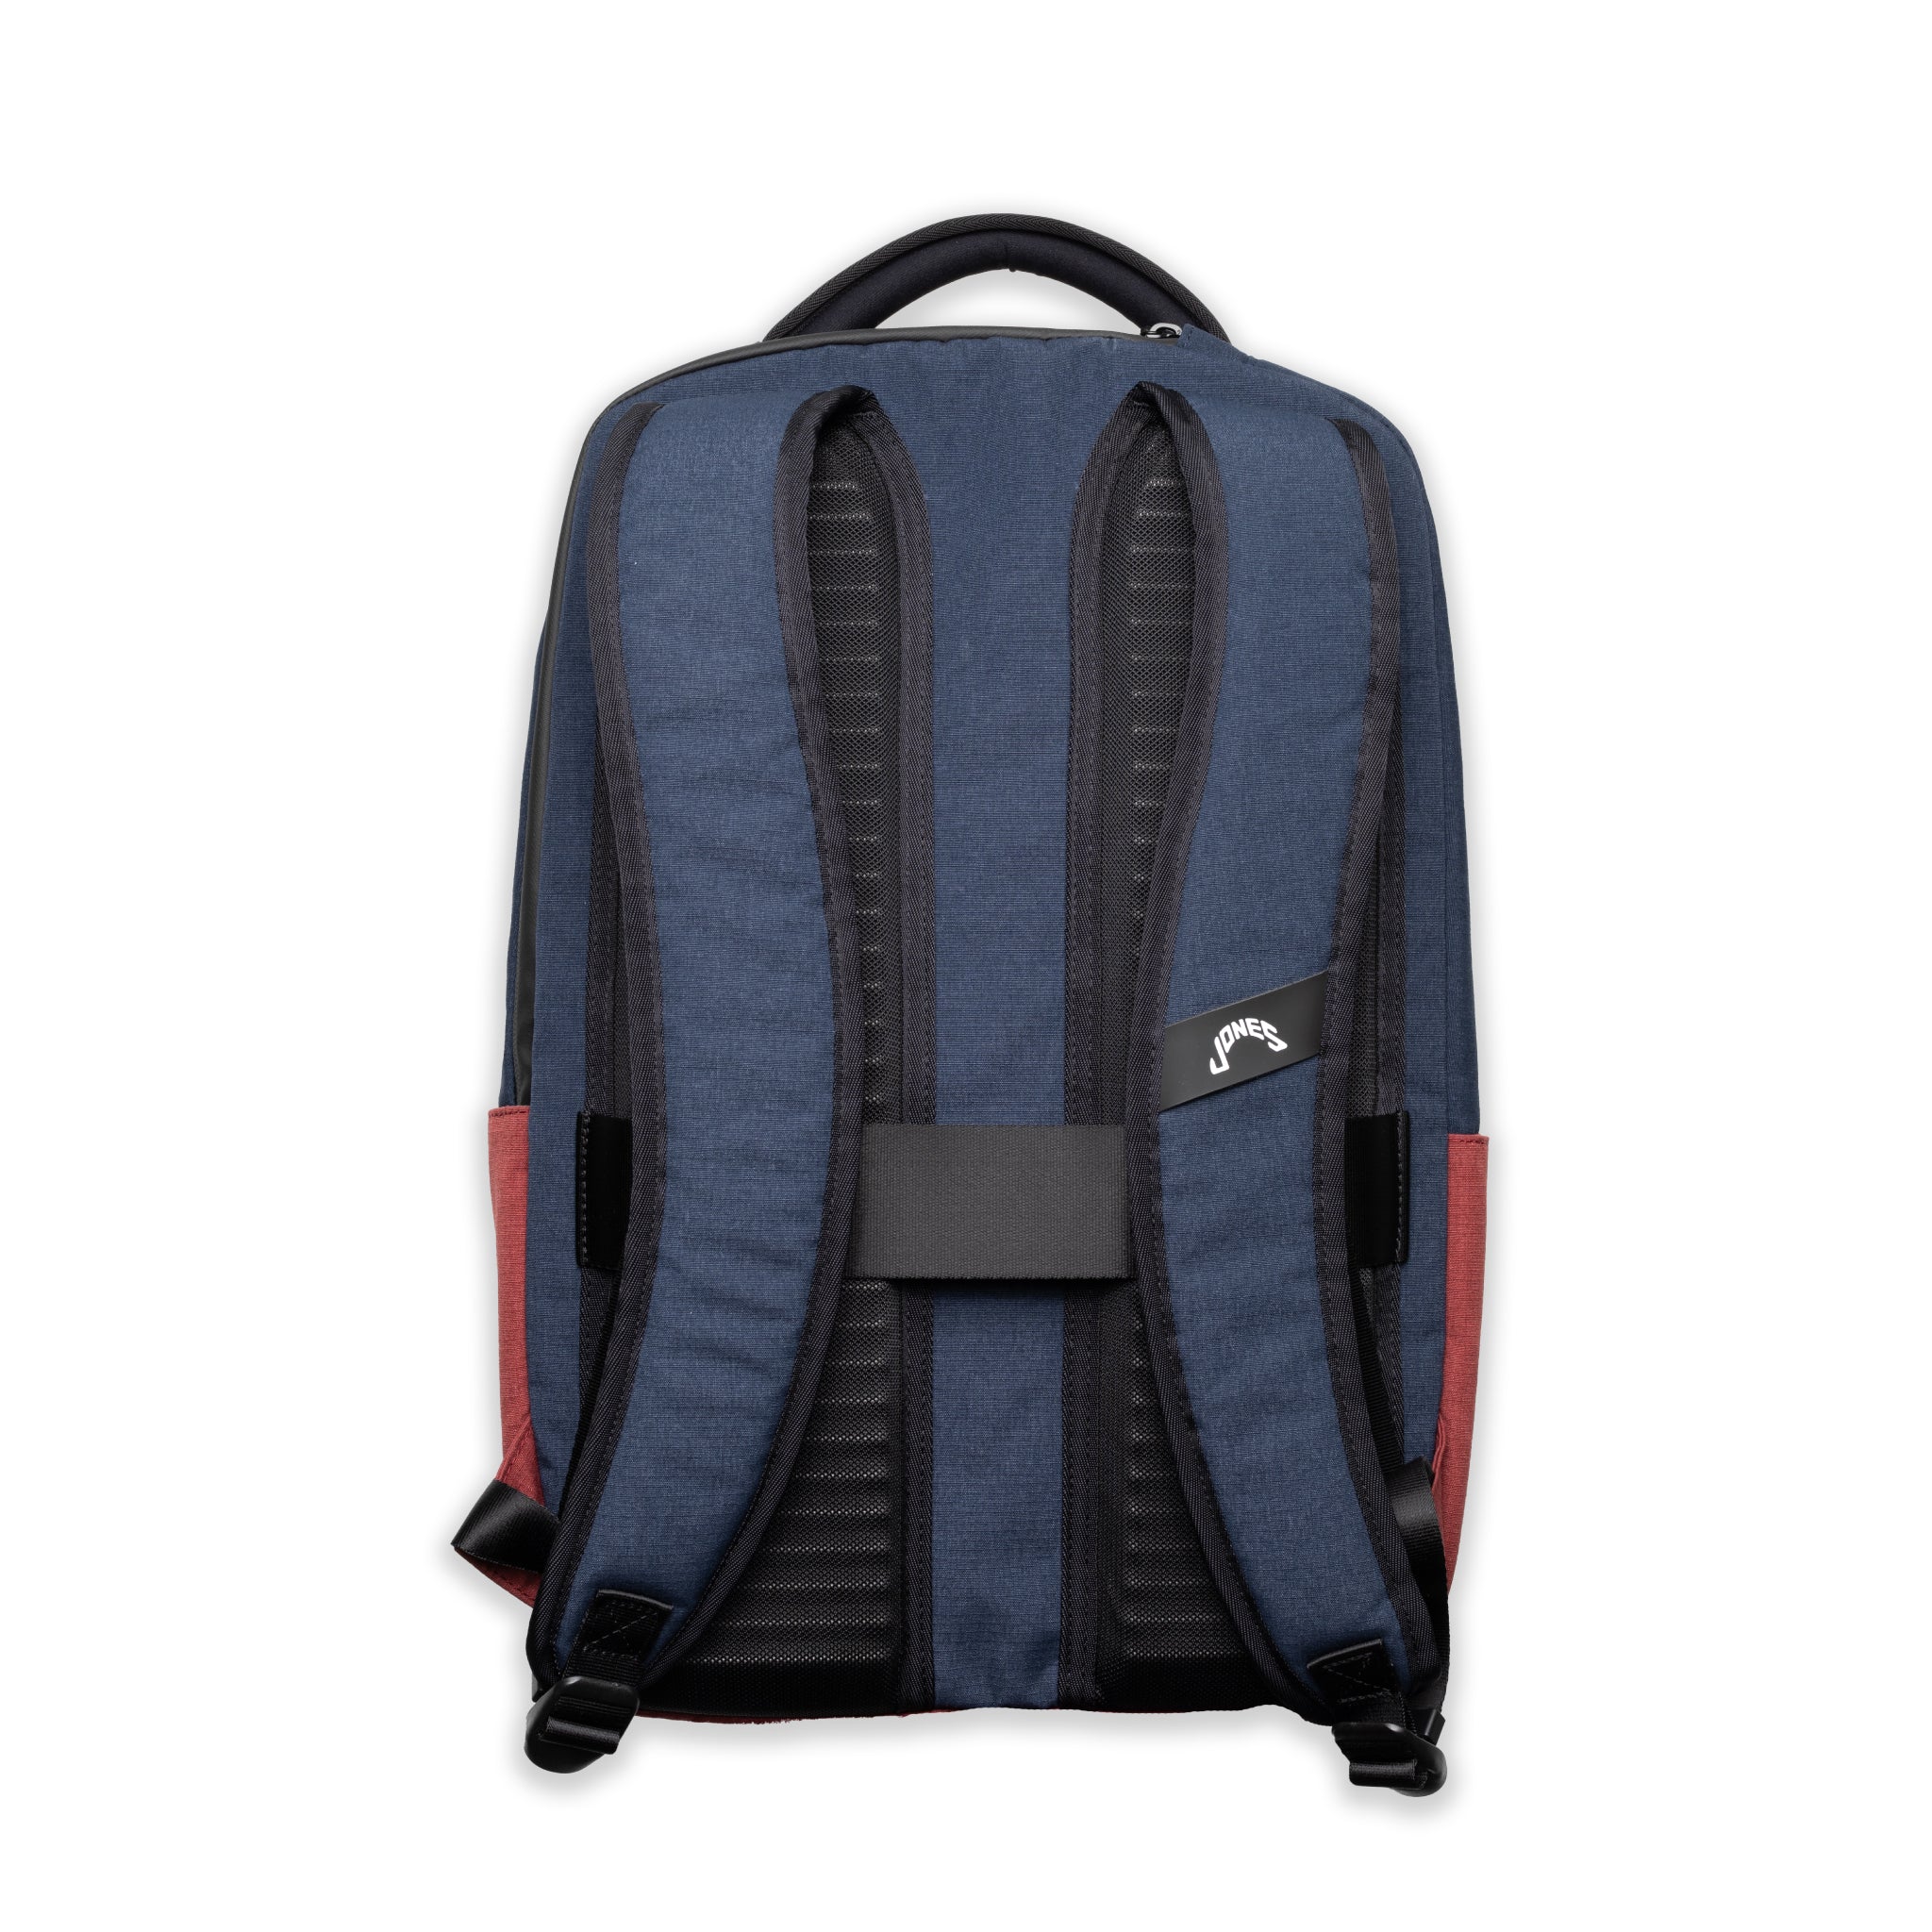 Jones Sports Co. A2 Backpack - Navy/Sonoma